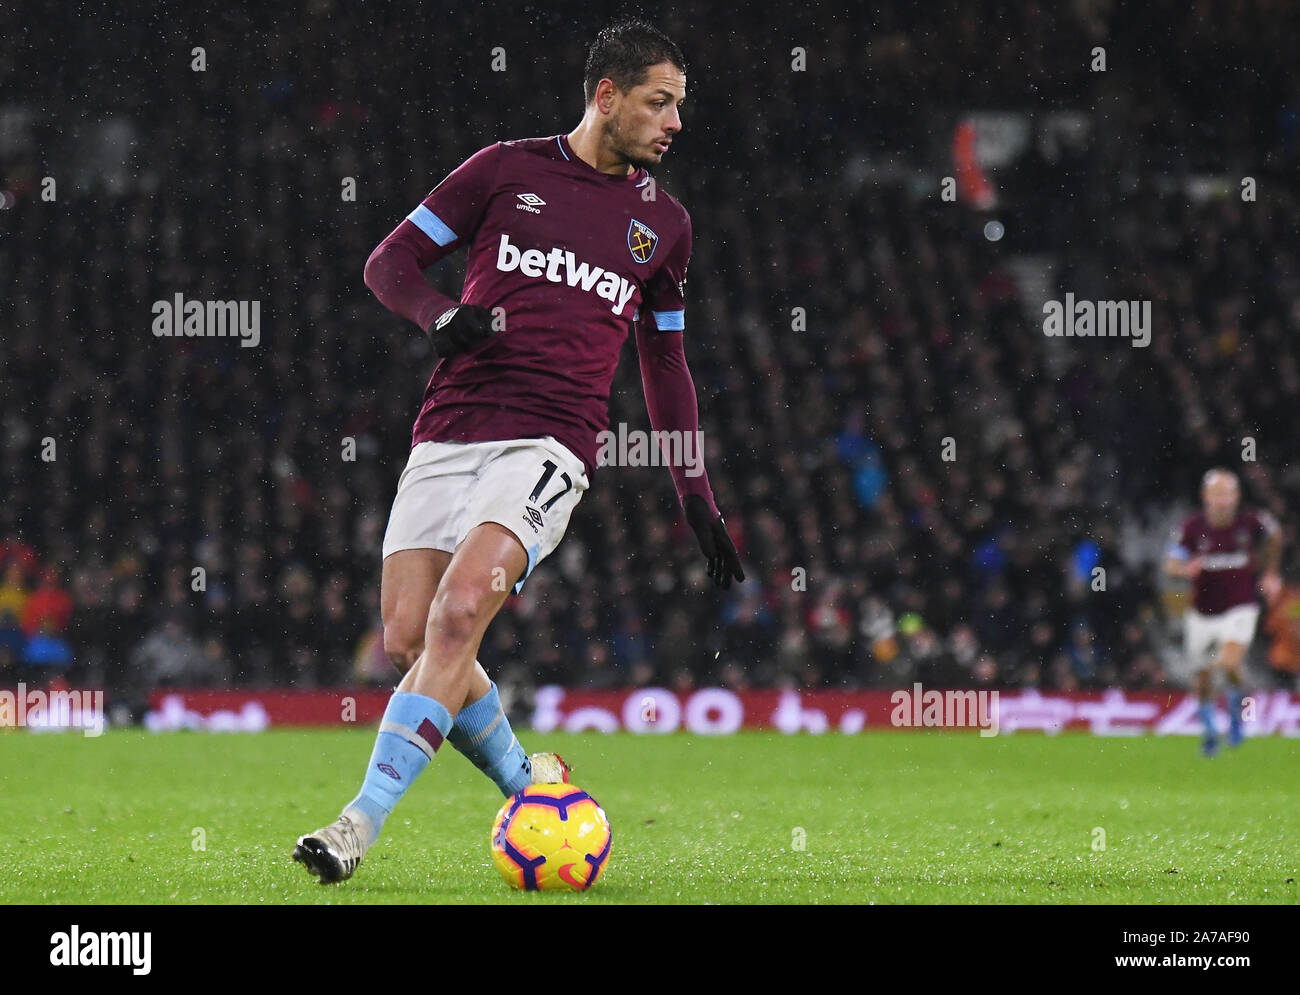 LONDON, ENGLAND - DECEMBER 15, 2018: Javier Hernandez Balcazar (Chicharito) of West Ham pictured during the 2018/19 Premier League game between Fulham FC FC and West Ham United at Craven Cottage.. Stock Photo